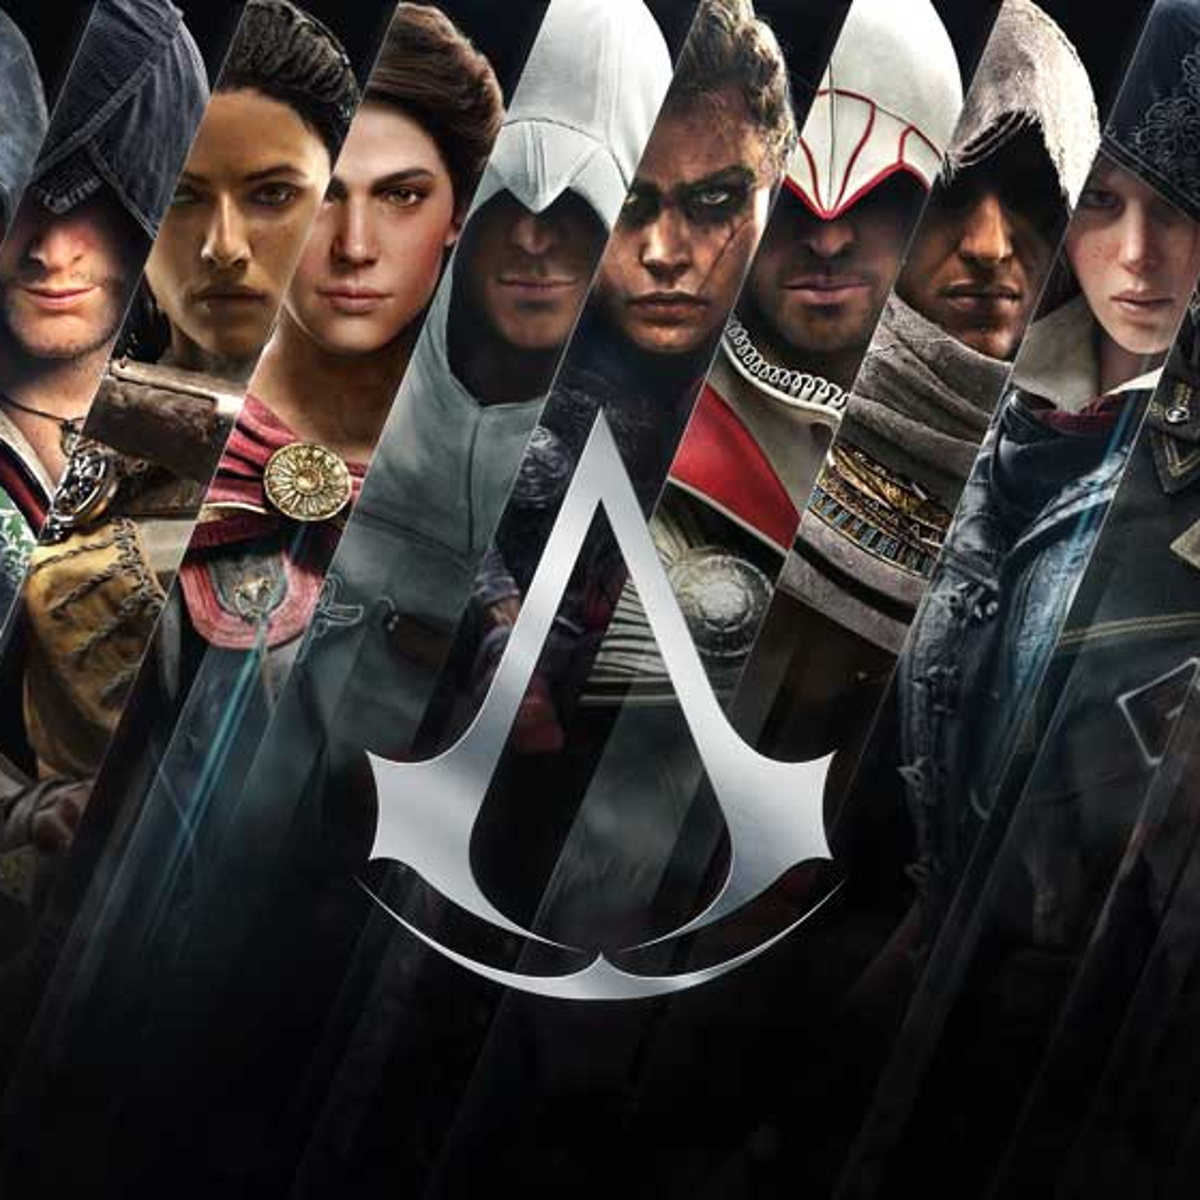 Assassin's Creed Red: Everything we know so far